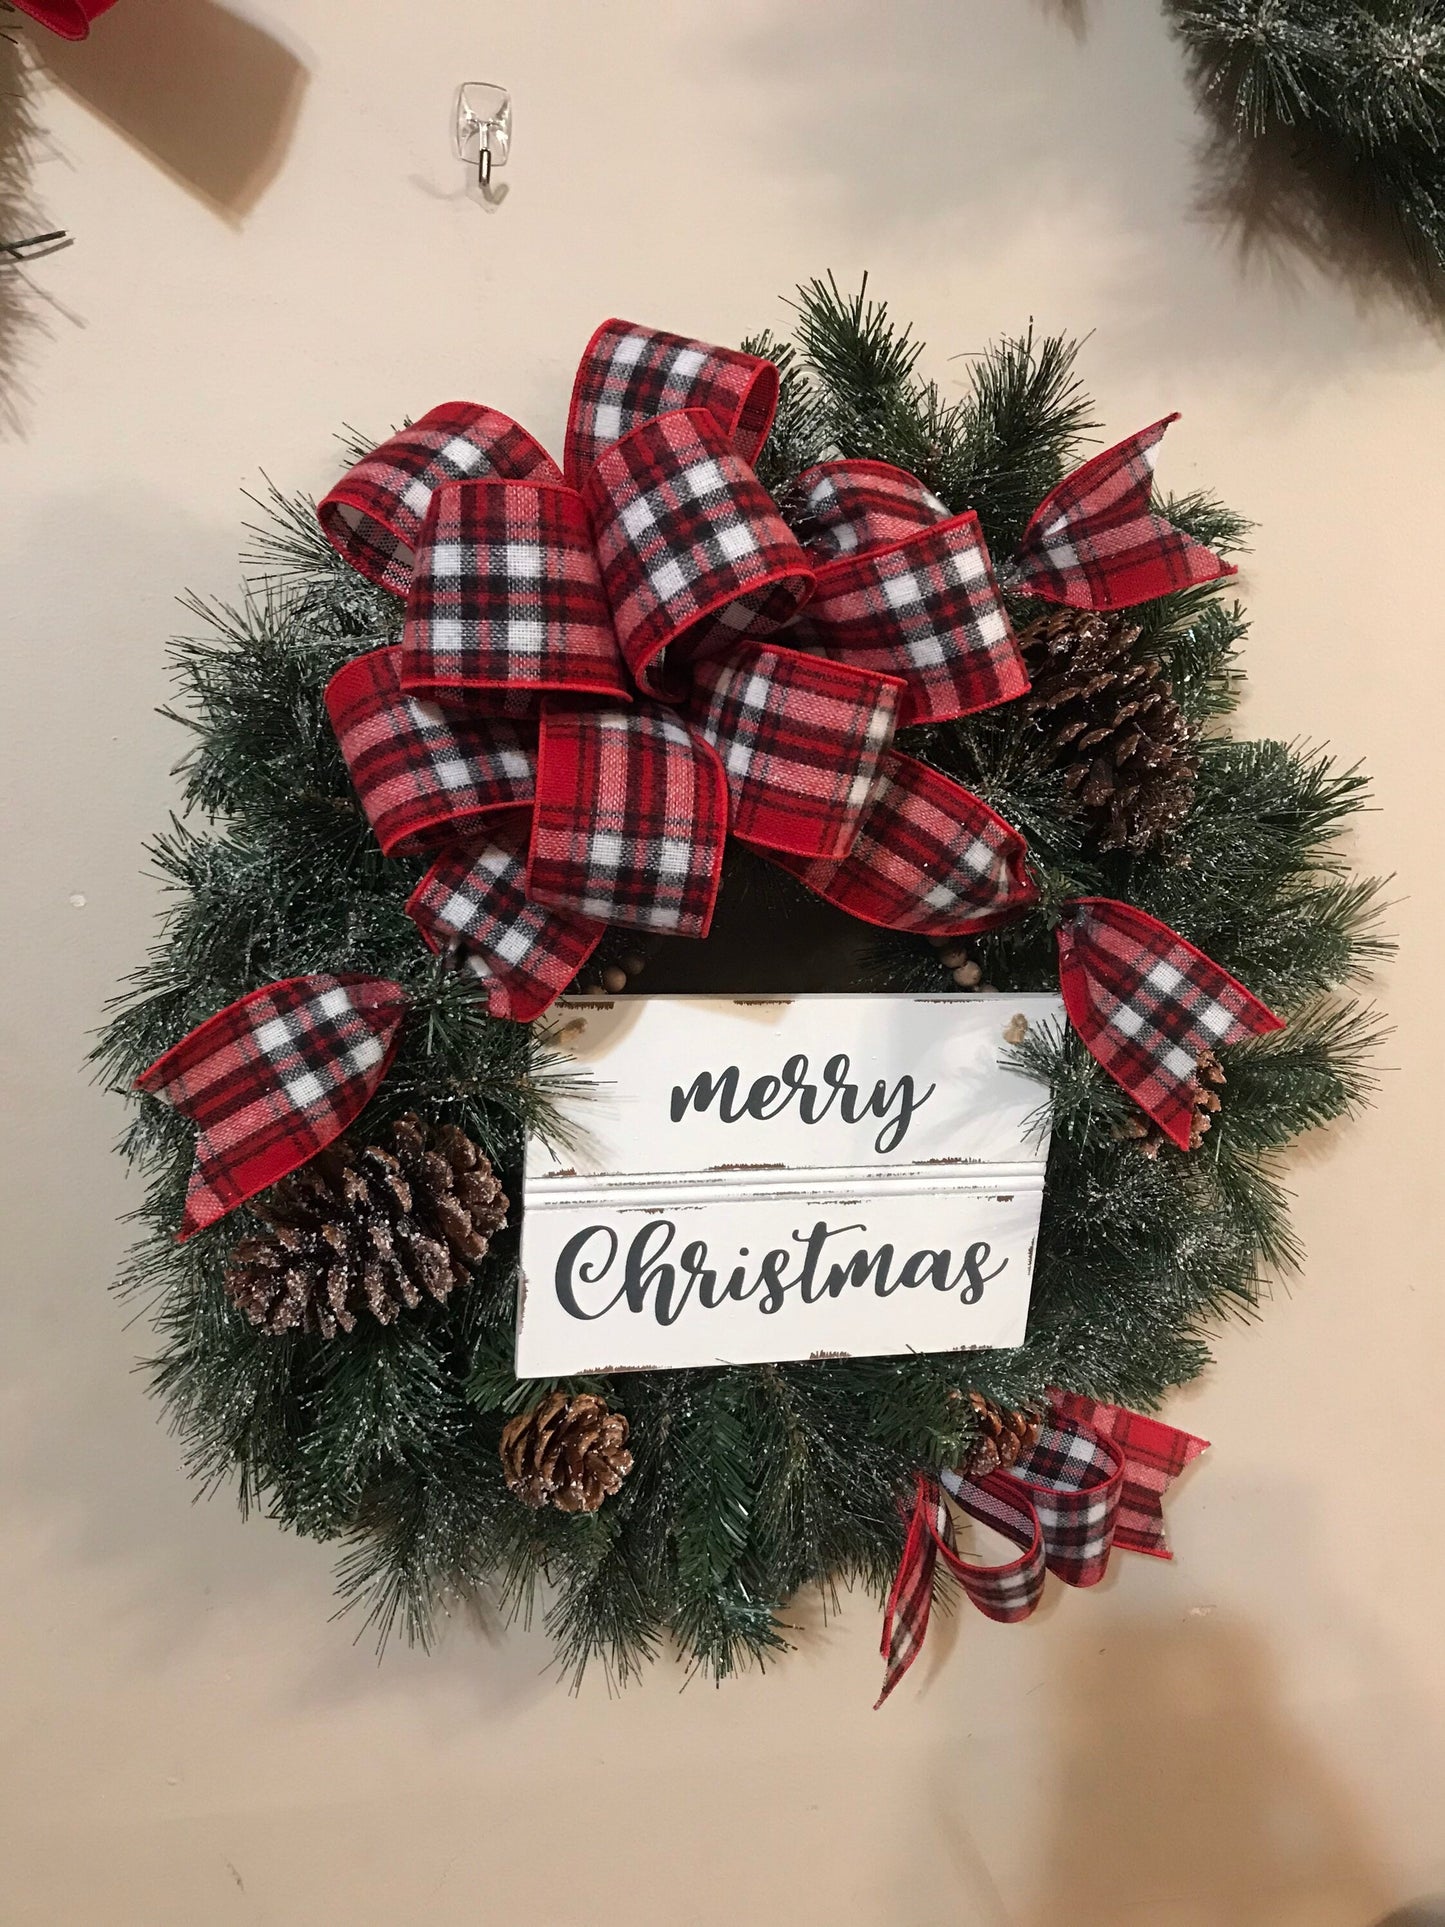 24” Frosted Evergreen Christmas Wreath with plaid bow and Merry Christmas wooden sign